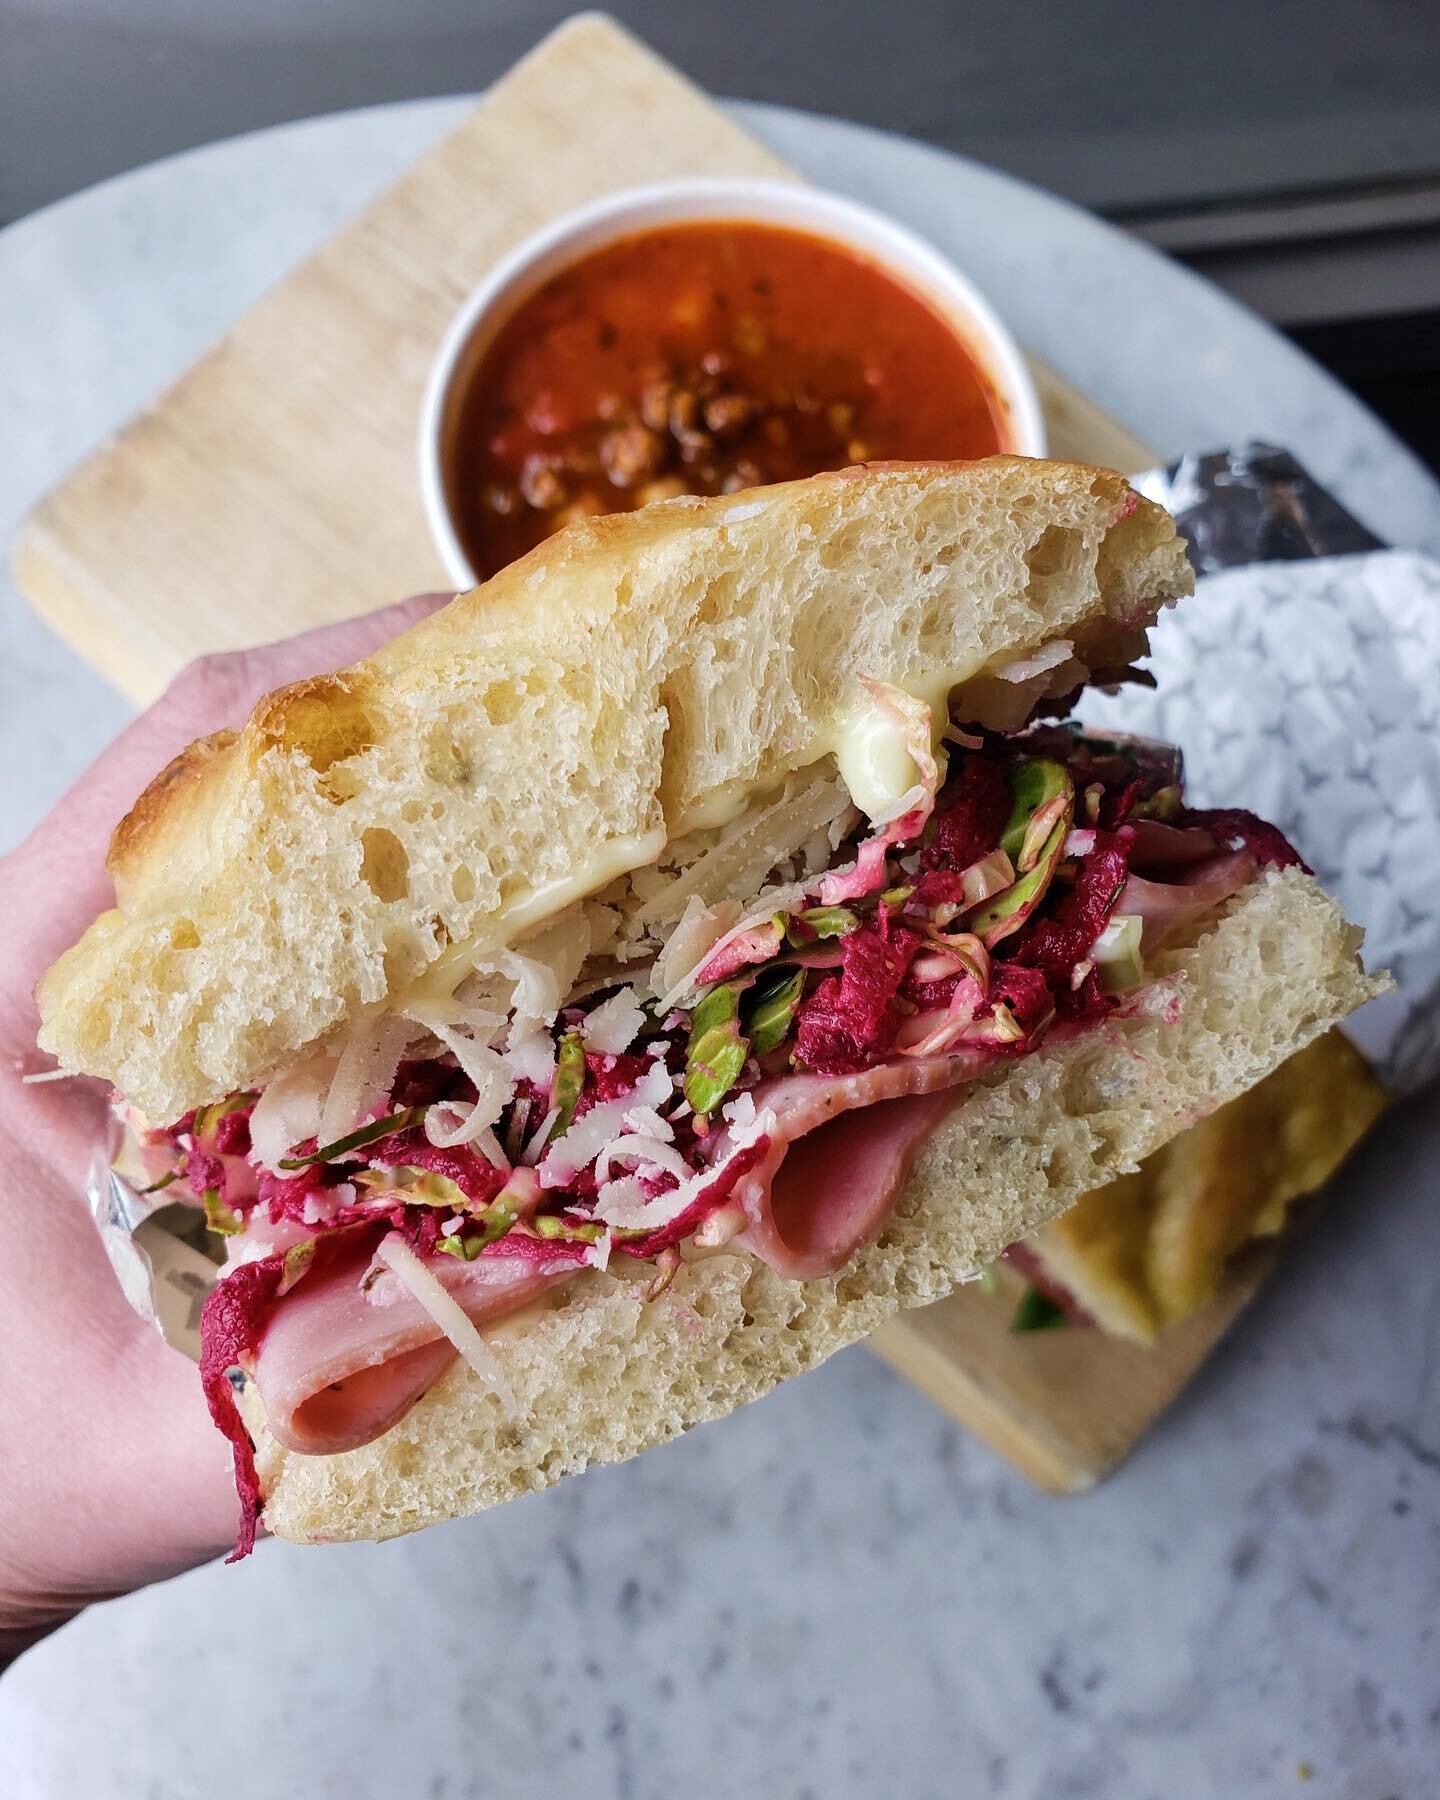 We&rsquo;re not ones to brag but this week&rsquo;s sandwiches are something else 🤤

Meat Sandwich
mild capicola / &nbsp;pepperoncini mayonnaise&nbsp;/ Brussels sprout and red beet slaw / shaved pecorino / house-made focaccia 

Vegetable Sandwich&nbs